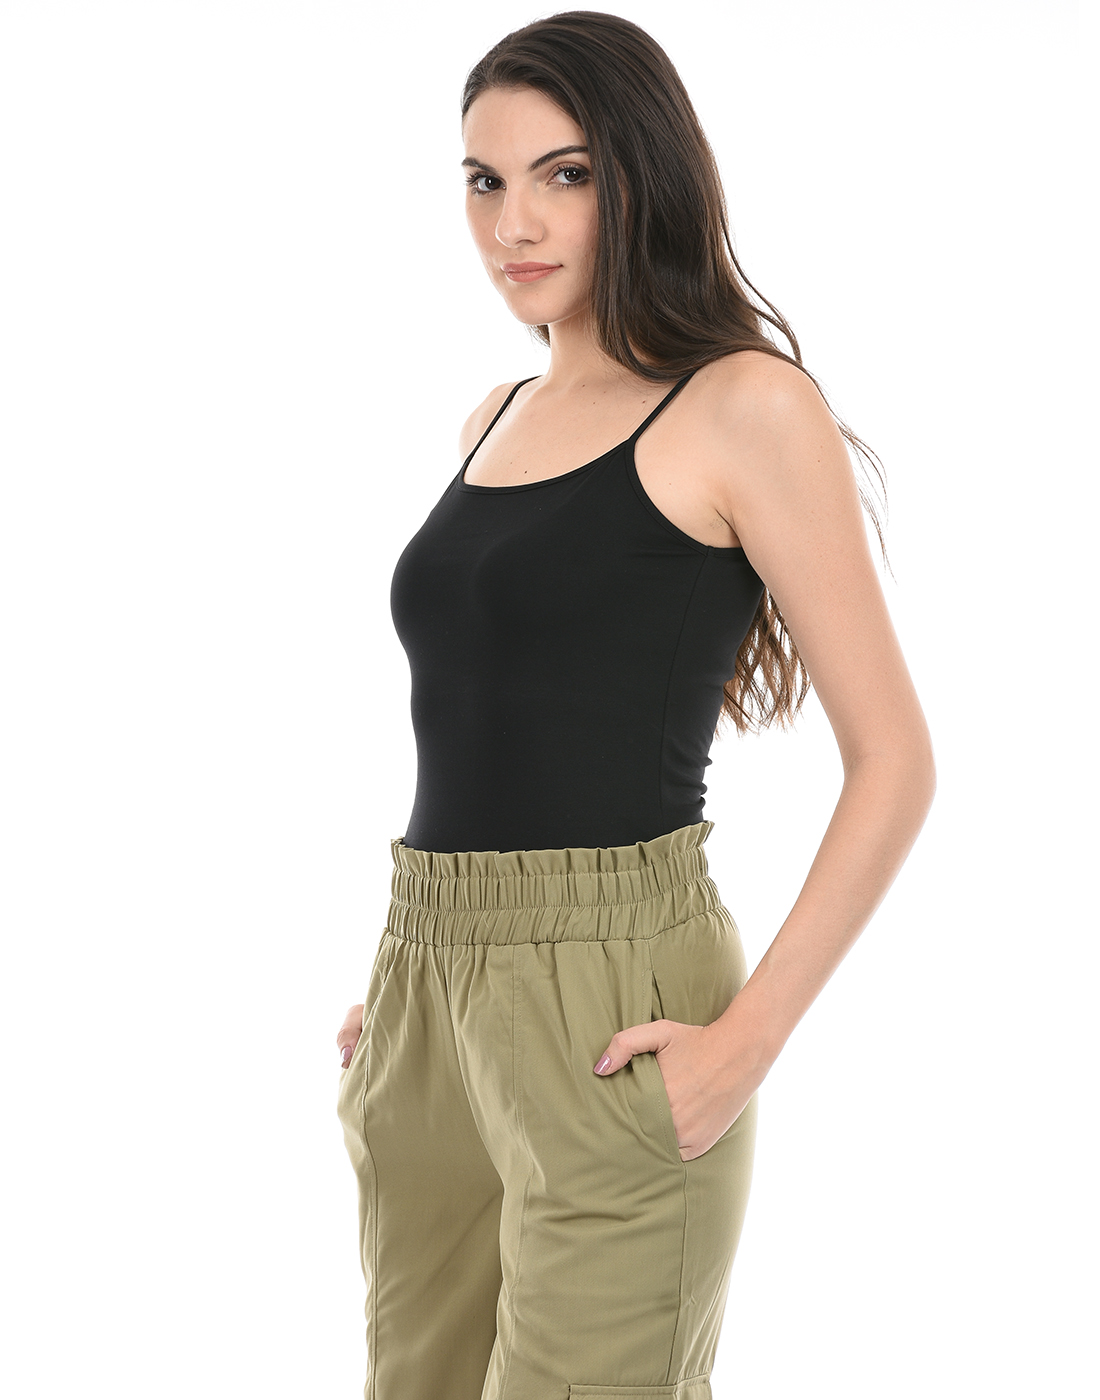 ONEWAY Regular Fit Sleeveless Solid Camisole Top for Women|Cotton Blend|Stretchable|Multipurpose|Casual Western Wear